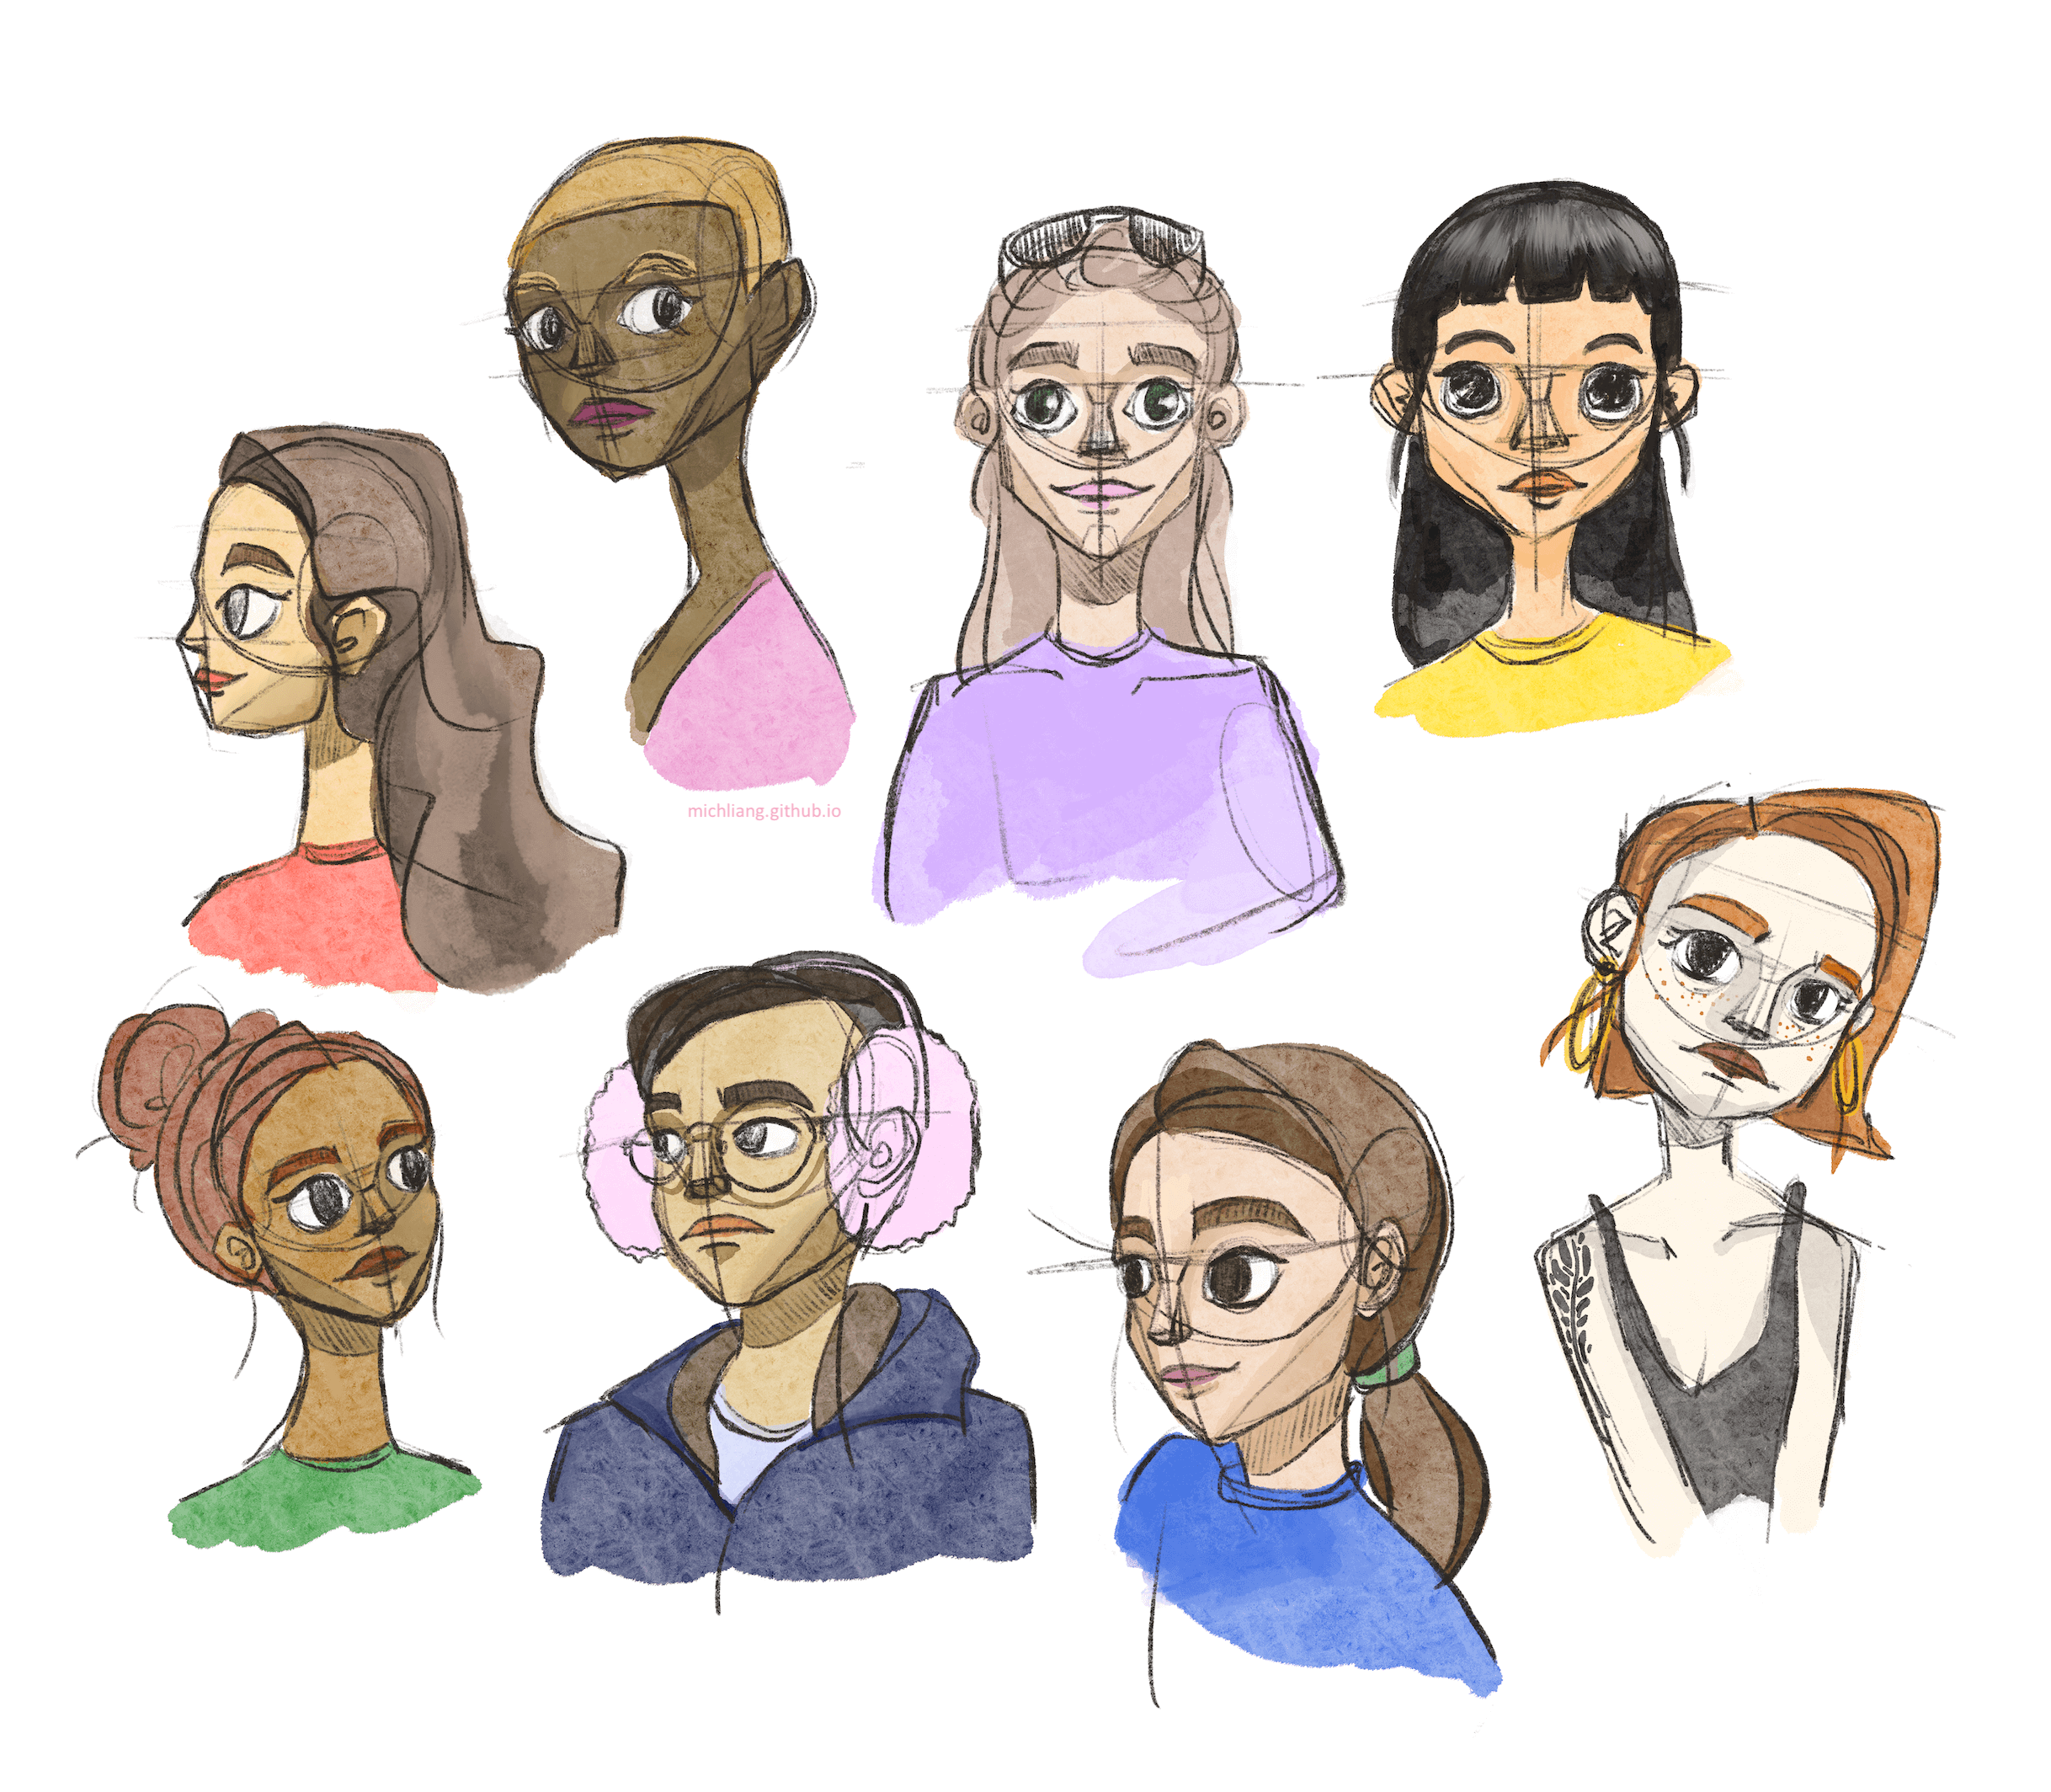 Practice sketching characters of different backgrounds